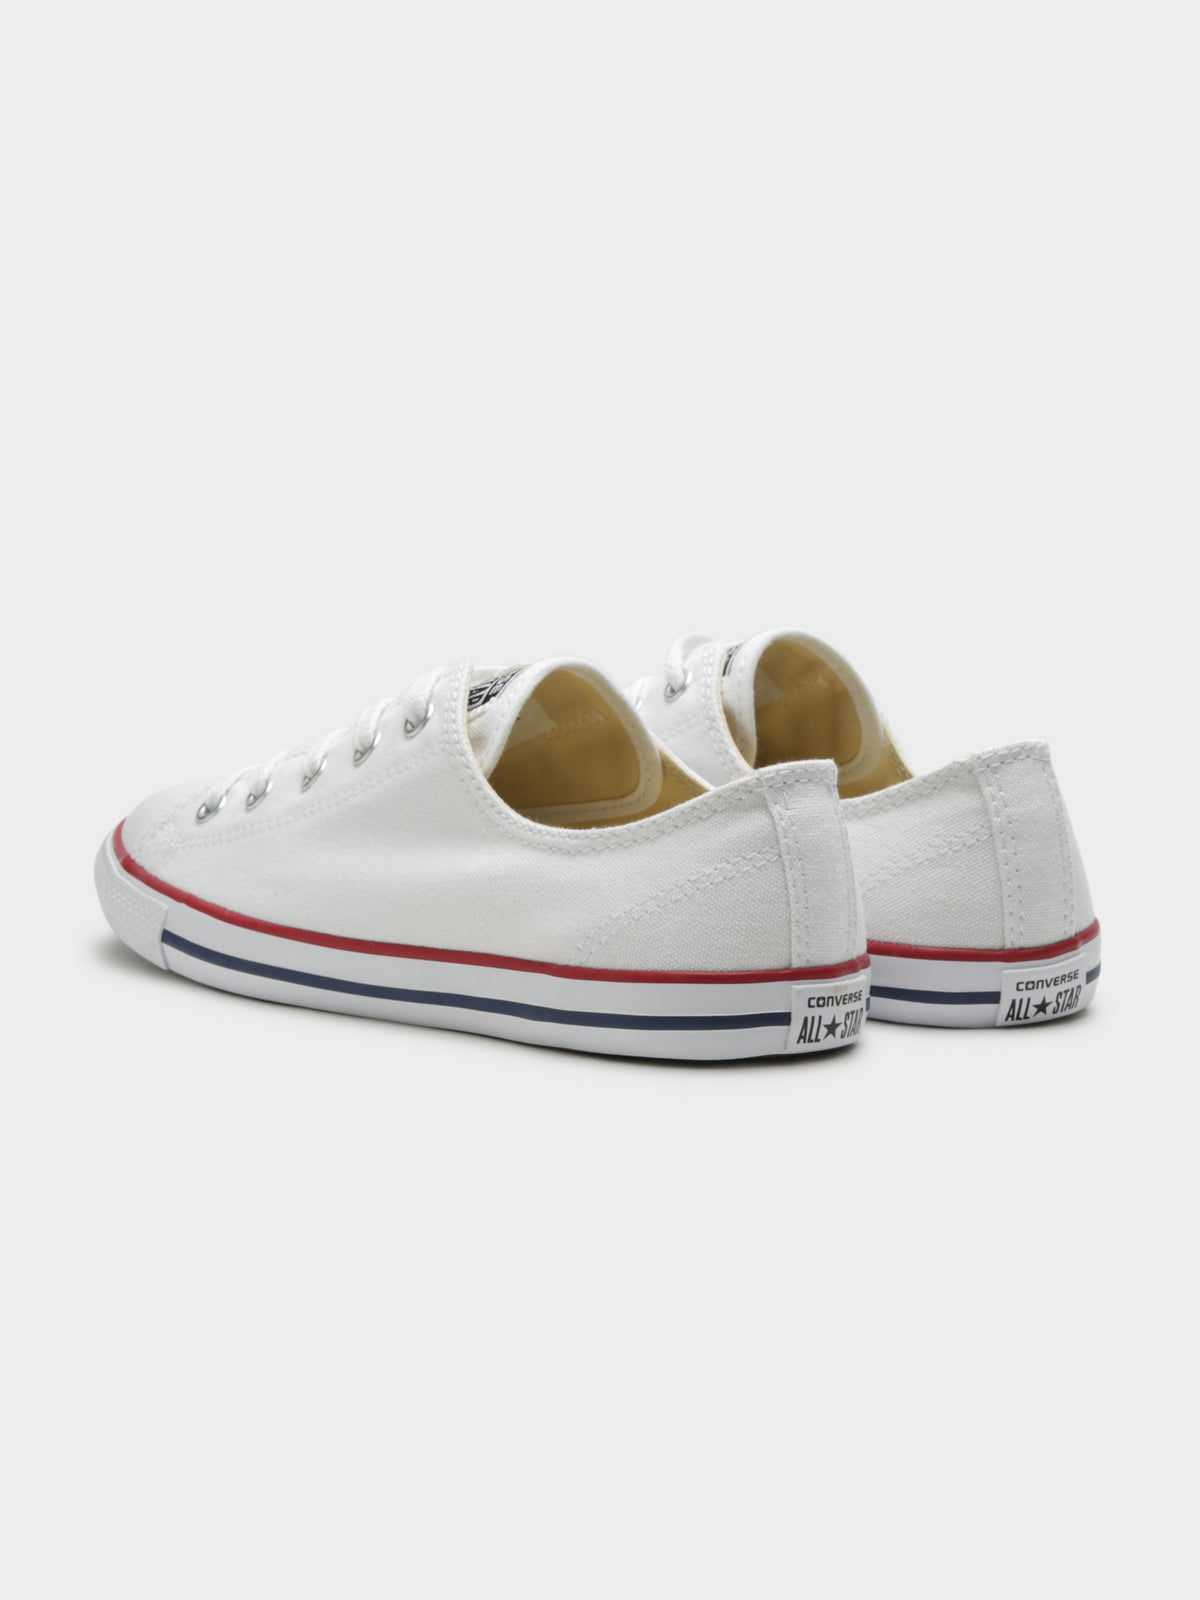 Womens Chuck Taylor Dainty Low-Top Sneakers in Optic White Canvas